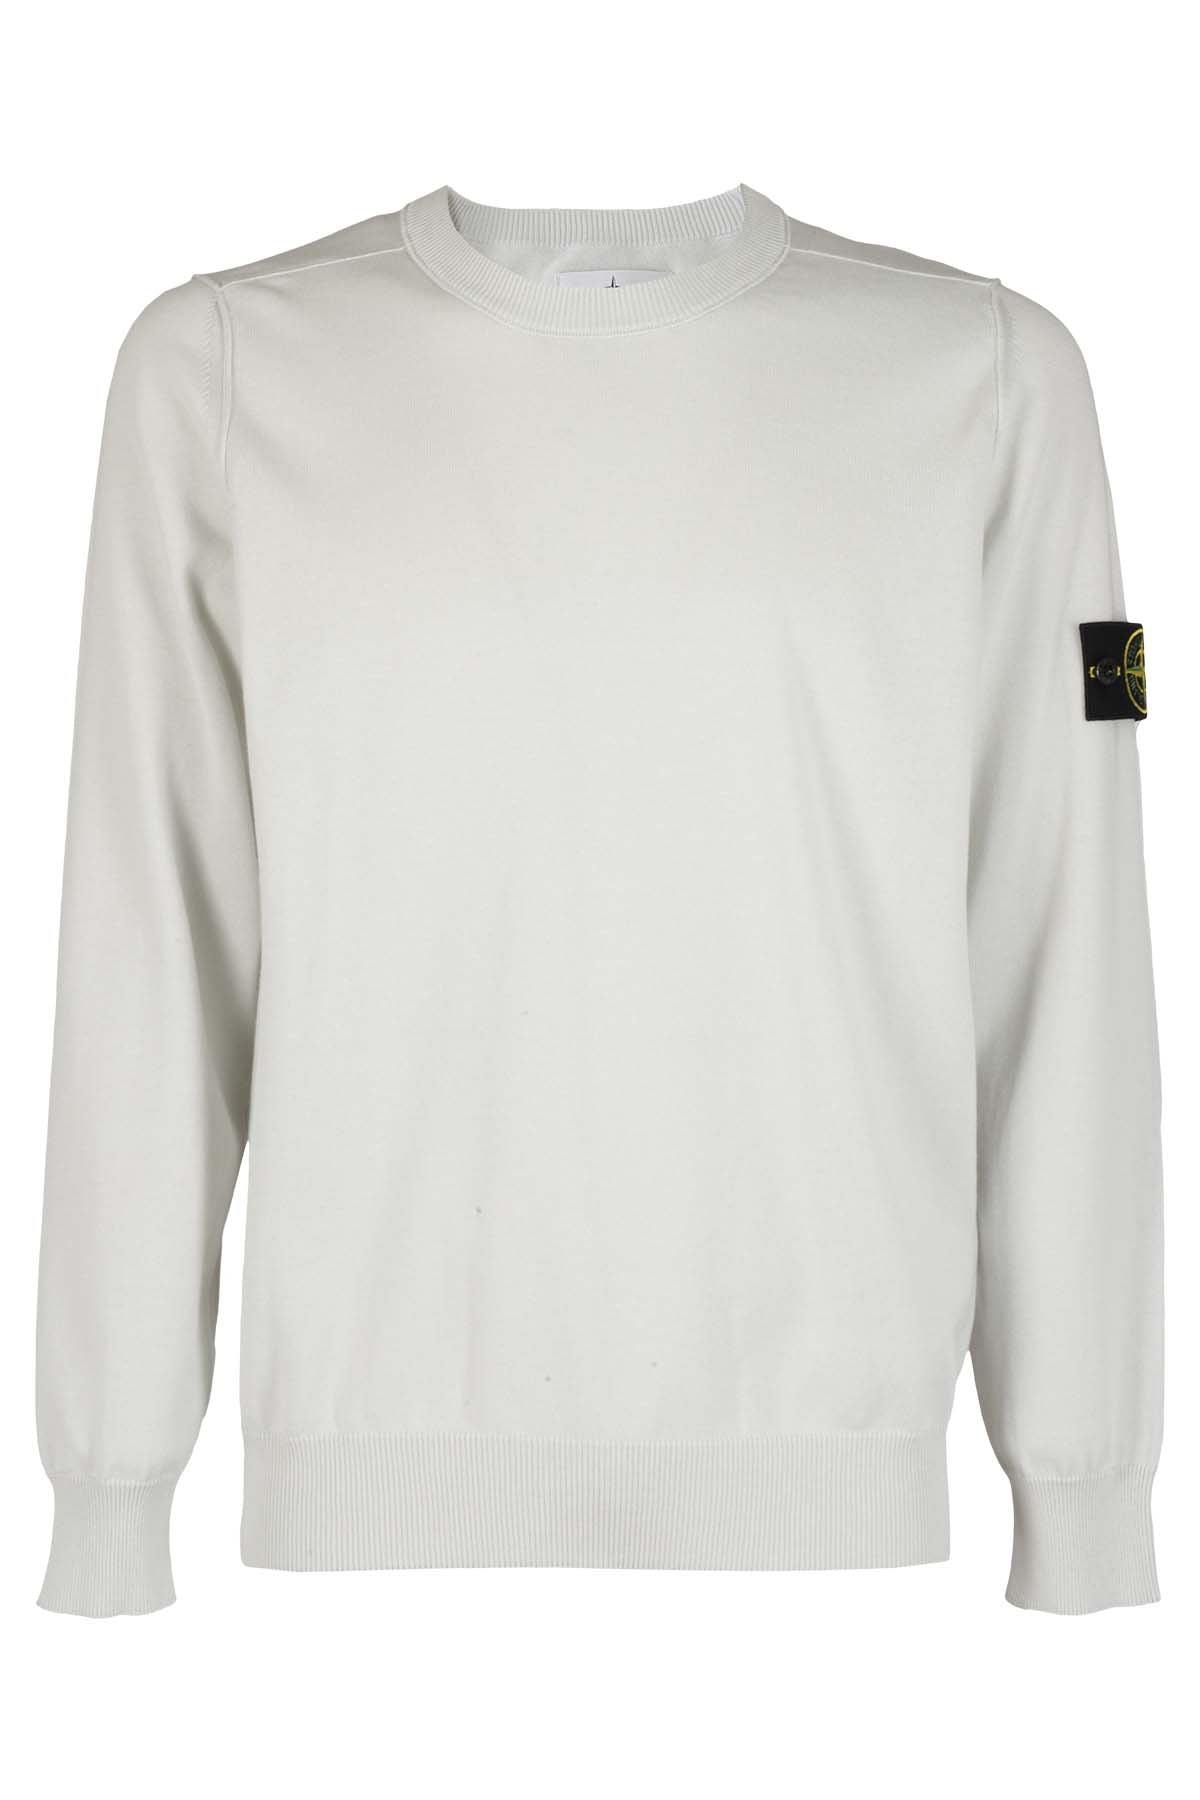 Stone Island Logo Patch Crewneck Knitted Jumper